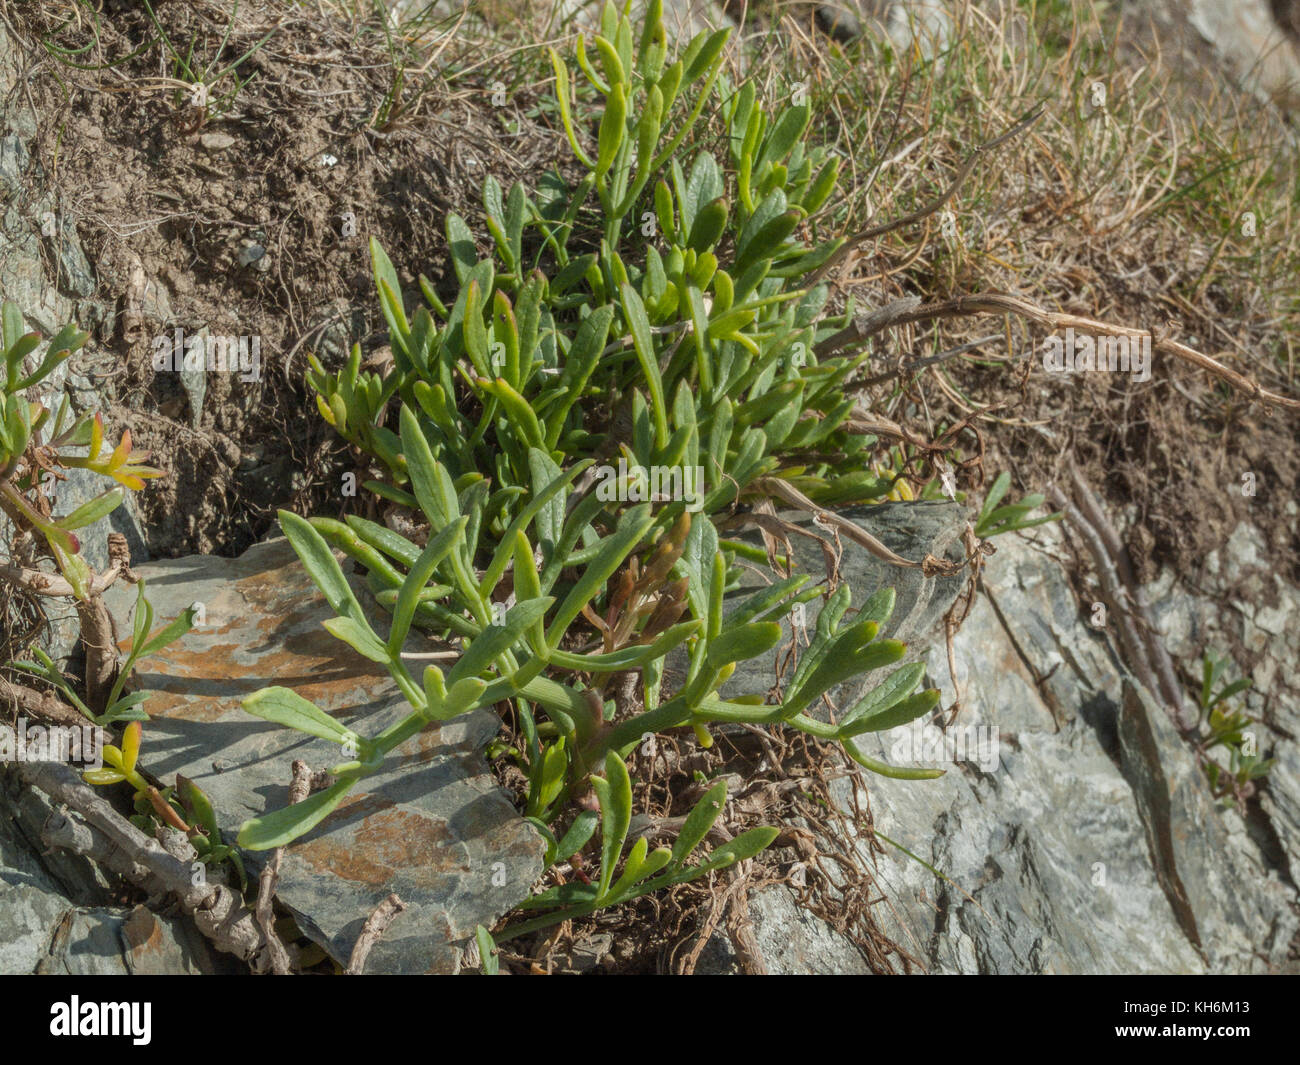 Example of Rock Samphire / Crithmum maritimum growing wild. Samphire is foraged from the wild and pickled for kitchen use. Stock Photo